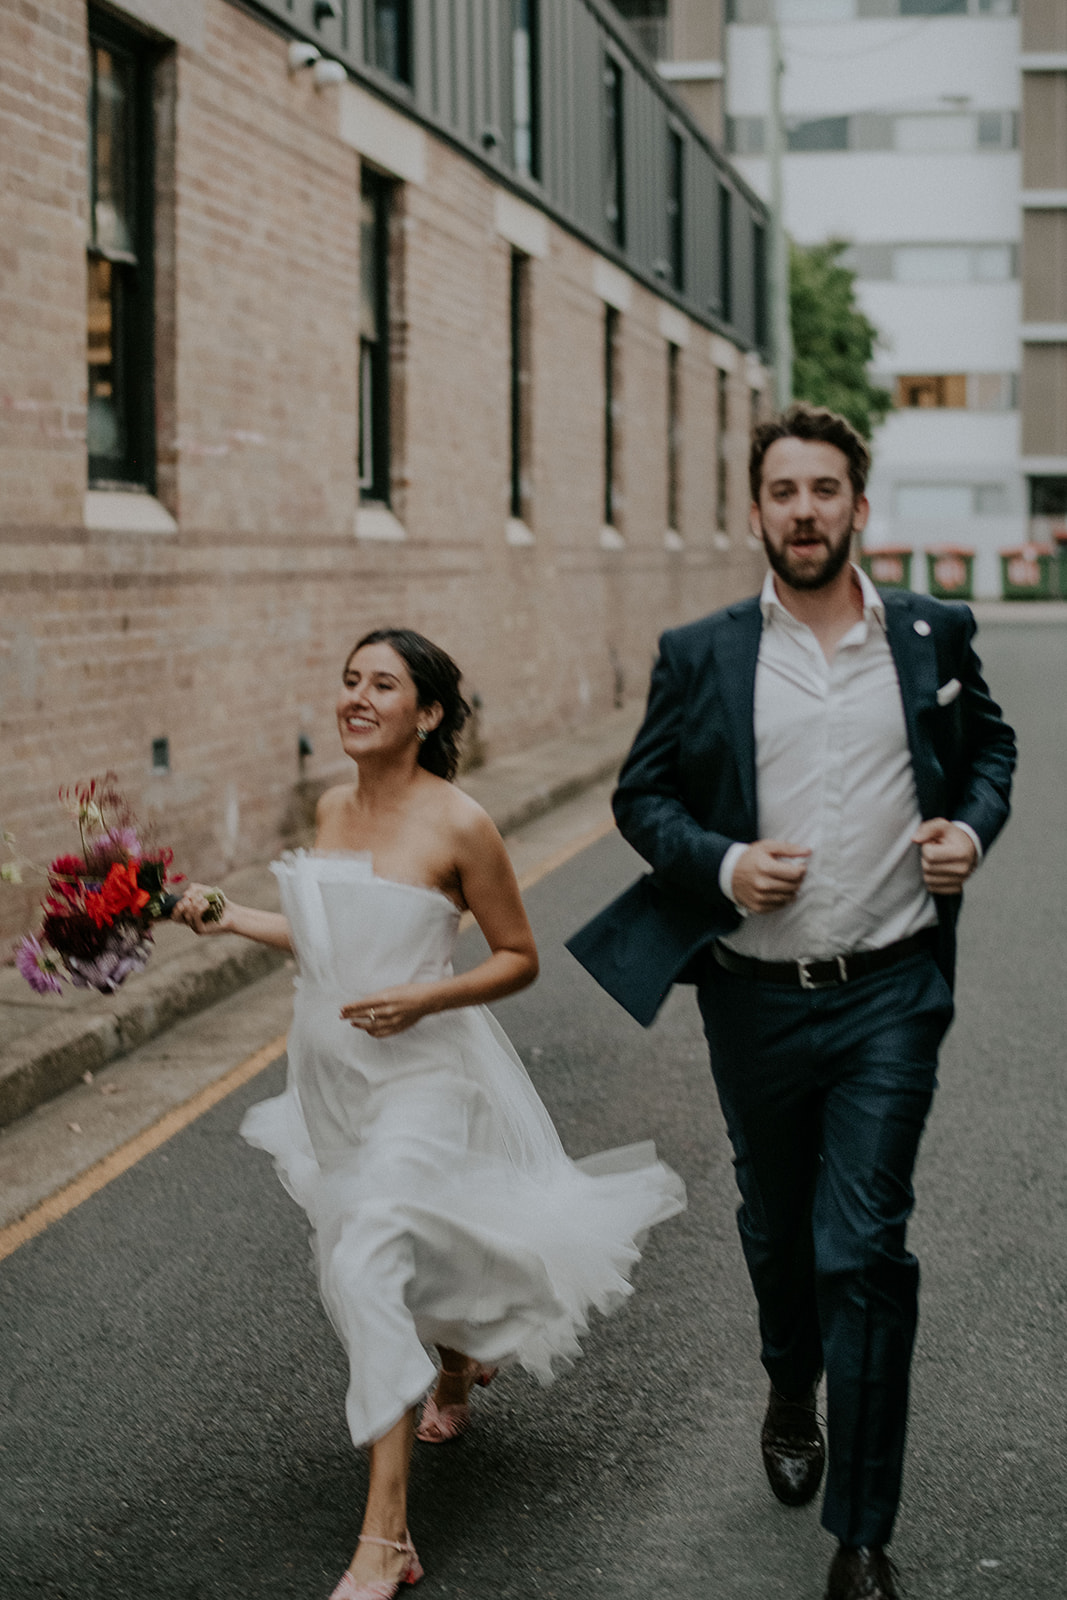 Scott Surplice portrait of bride and groom as they run in alley